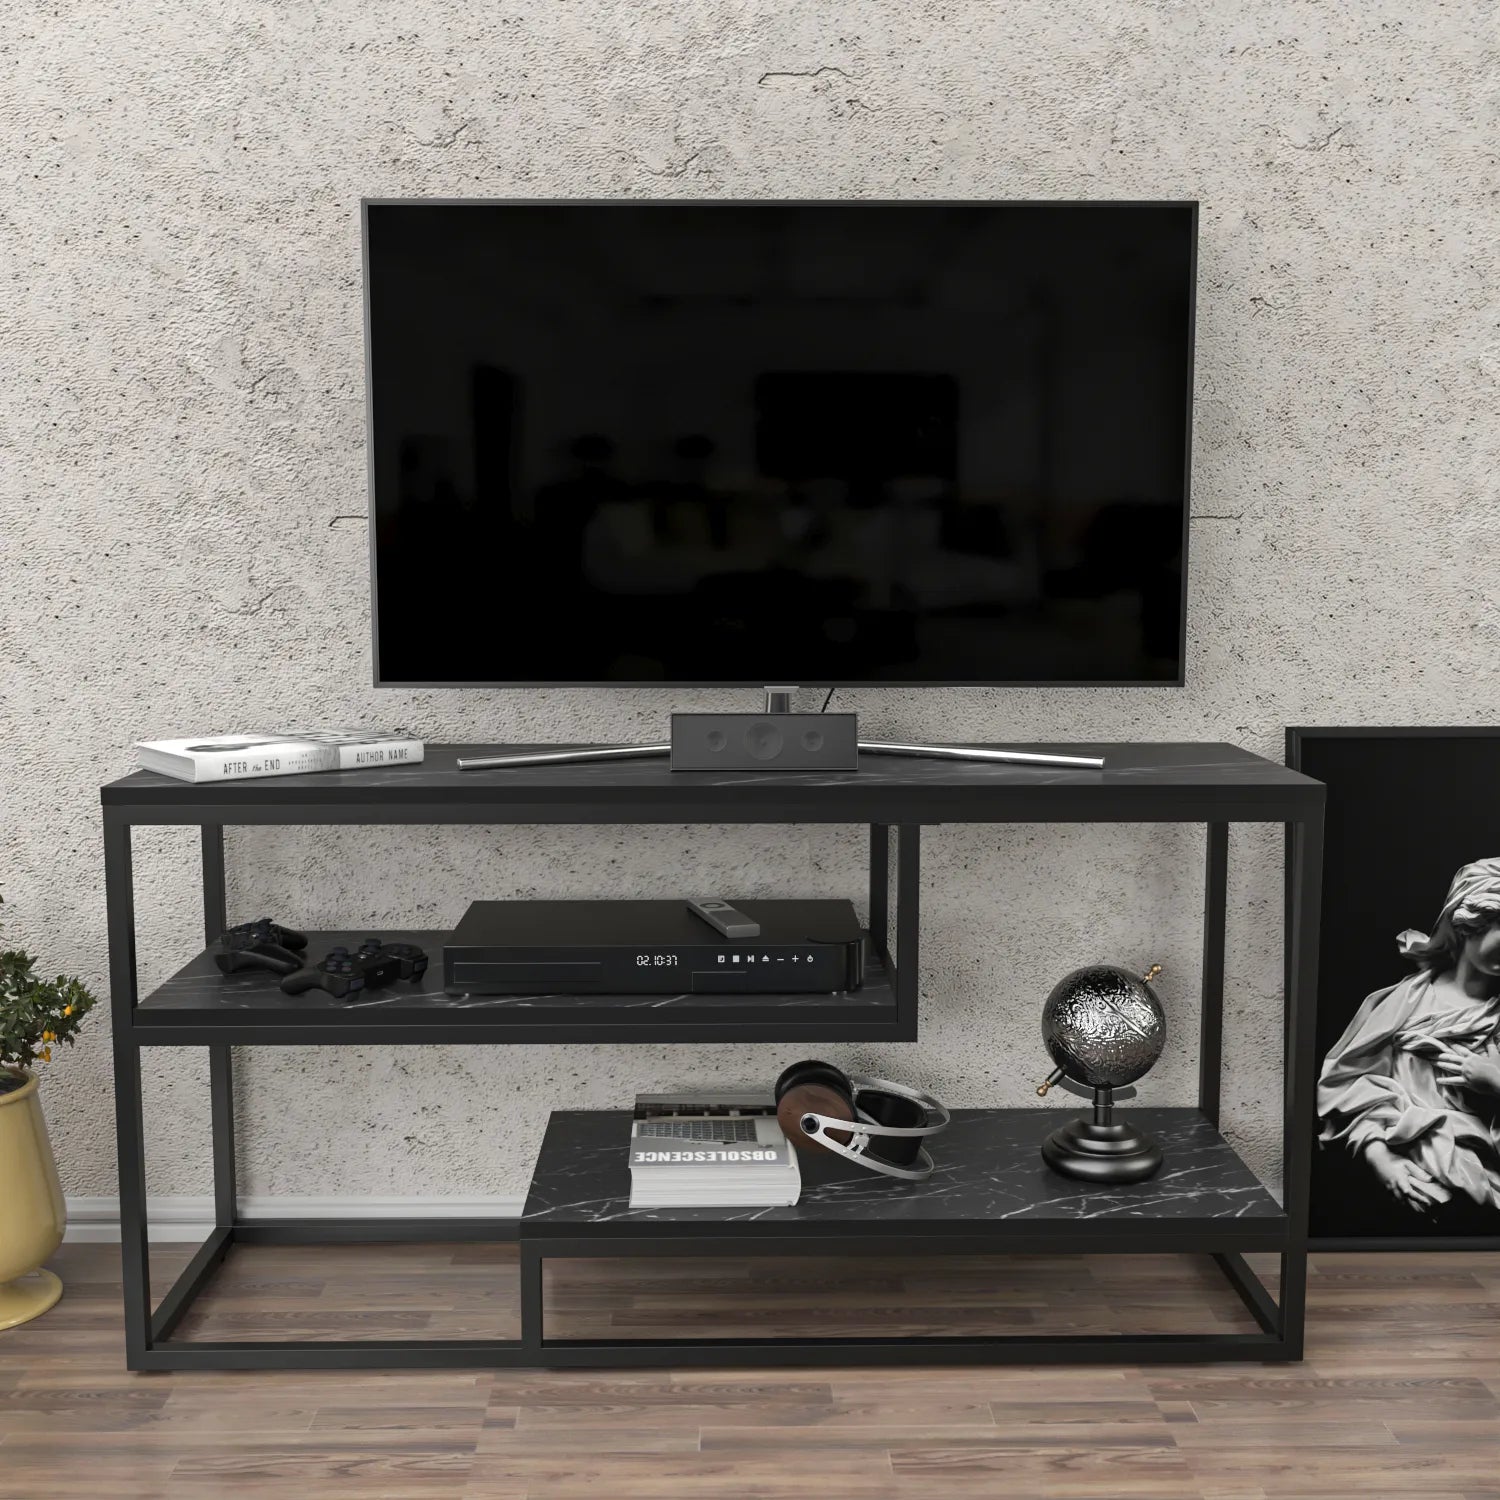 Lorin 47 inch Wide Metal Wood TV Stand Media Console for TVs up to 55 inch